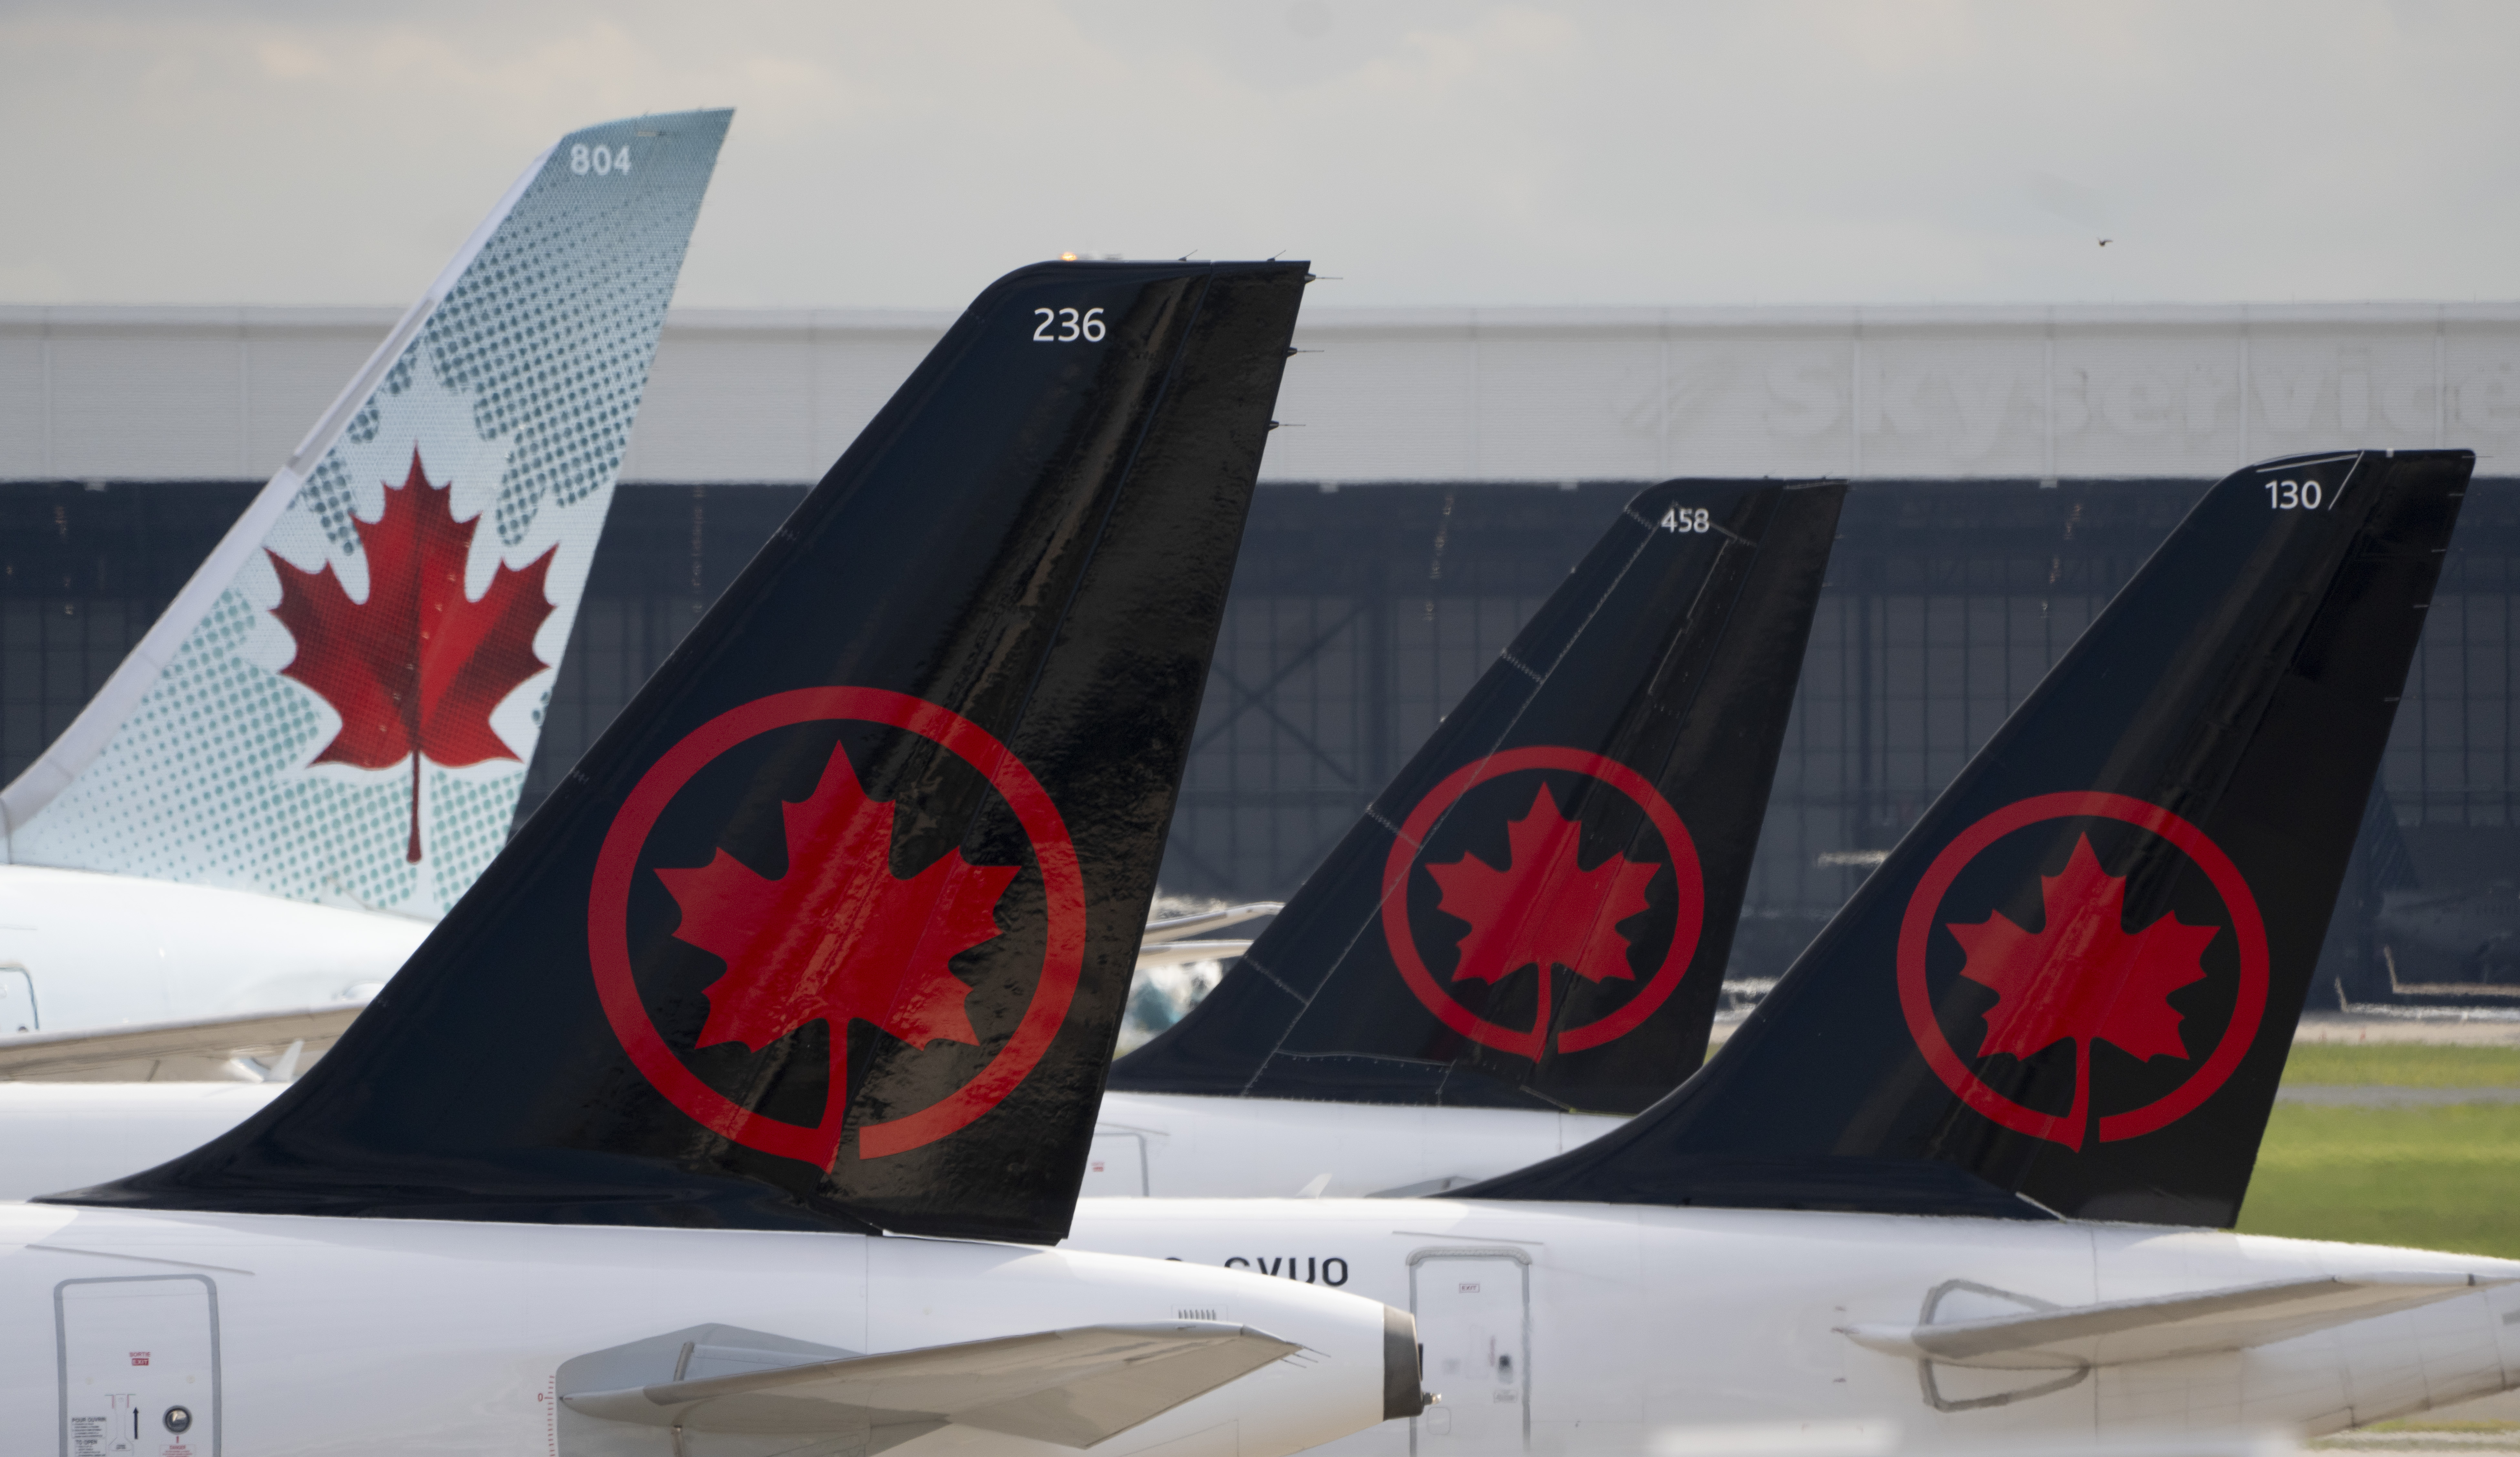 Flights delayed at YVR after Air Canada plane hits another on the tarmac